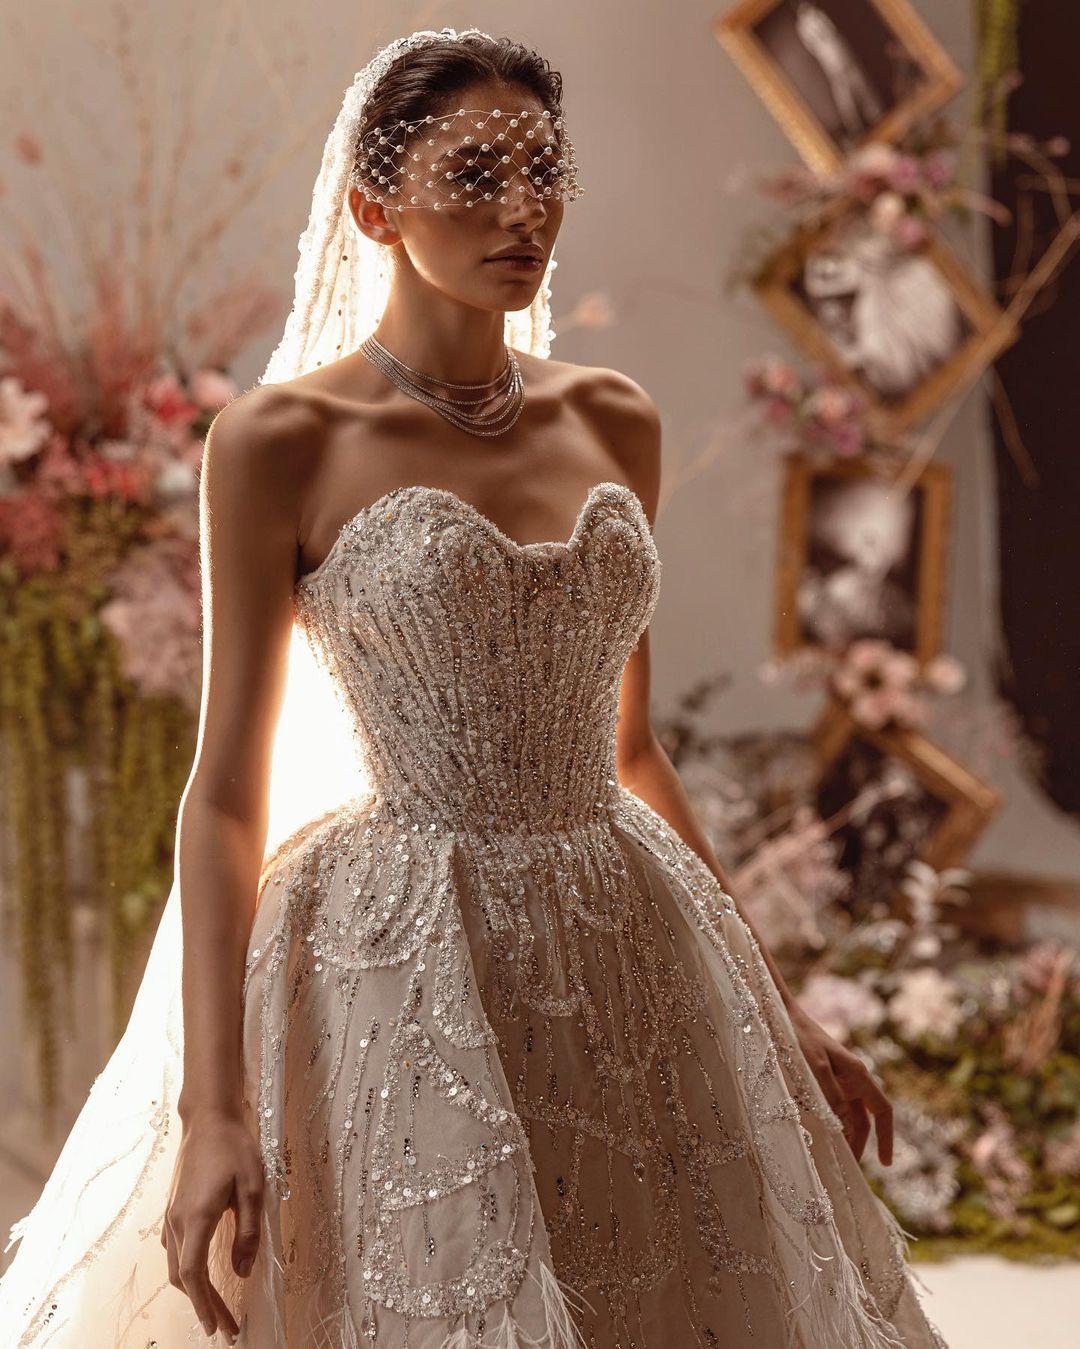 Reem Kachmar Bridal collection 2022 
Fabulously combine ultra feminine structured corset bodice with shimmering beaded patterns and exquisite feather and floral applique for a Glamorous Modern and Timeless Bride . 

#kachmarreem #reemkachmarcouture #reemkachmar #reemkachmar2022 #reemkachmarbridal22 #couture #fashion #brides #weddinggown #weddingdress #abudhabi #love #her #beirut #lebanon #riyadh #jeddah #dubai #cairo #kuwait #doha #instafashion #instacouture #kachmarreem #instabride #ss22